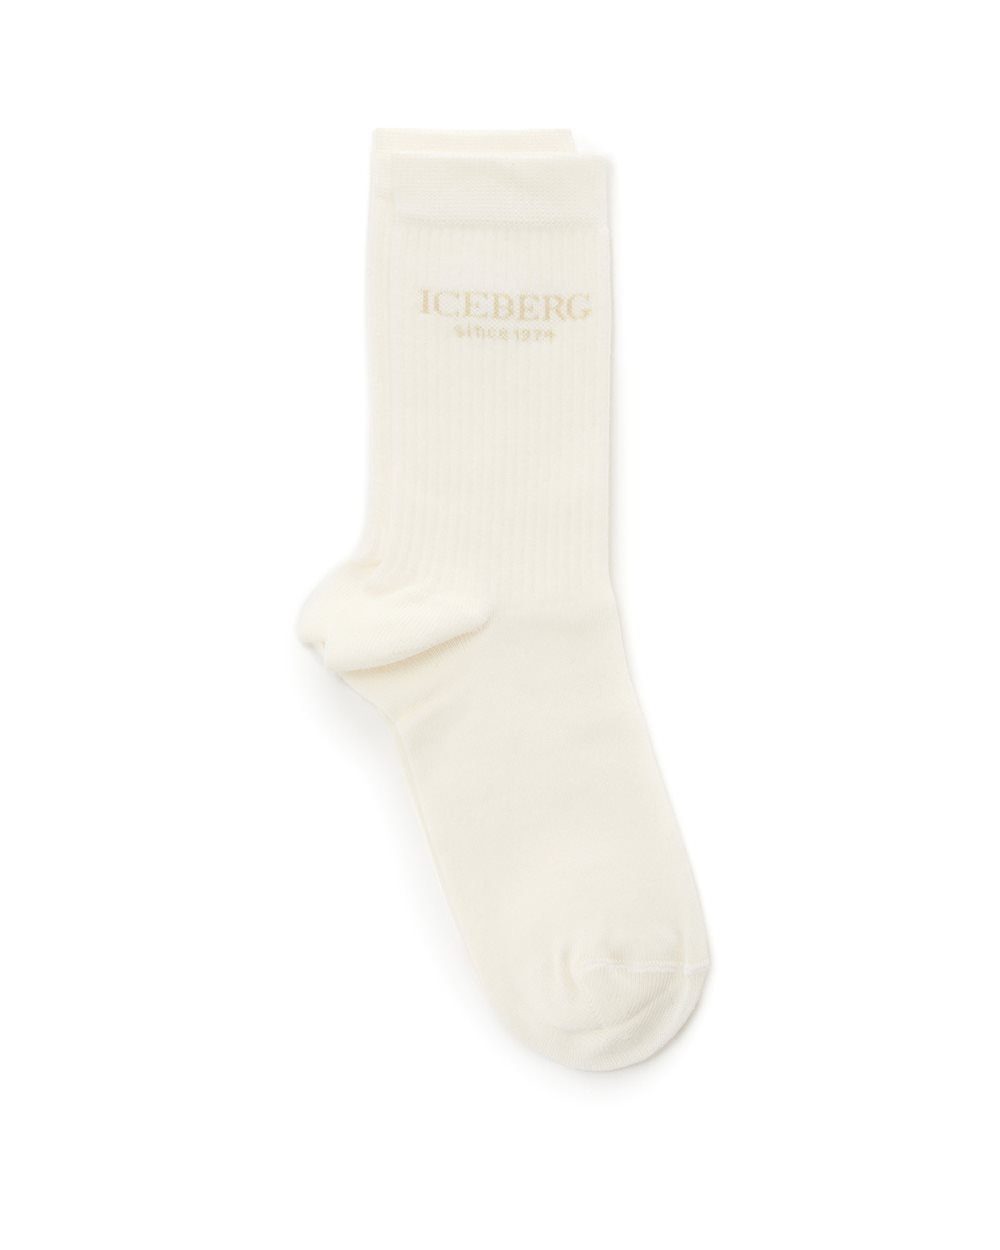 Cotton socks with logo - carosello HP woman accessories | Iceberg - Official Website